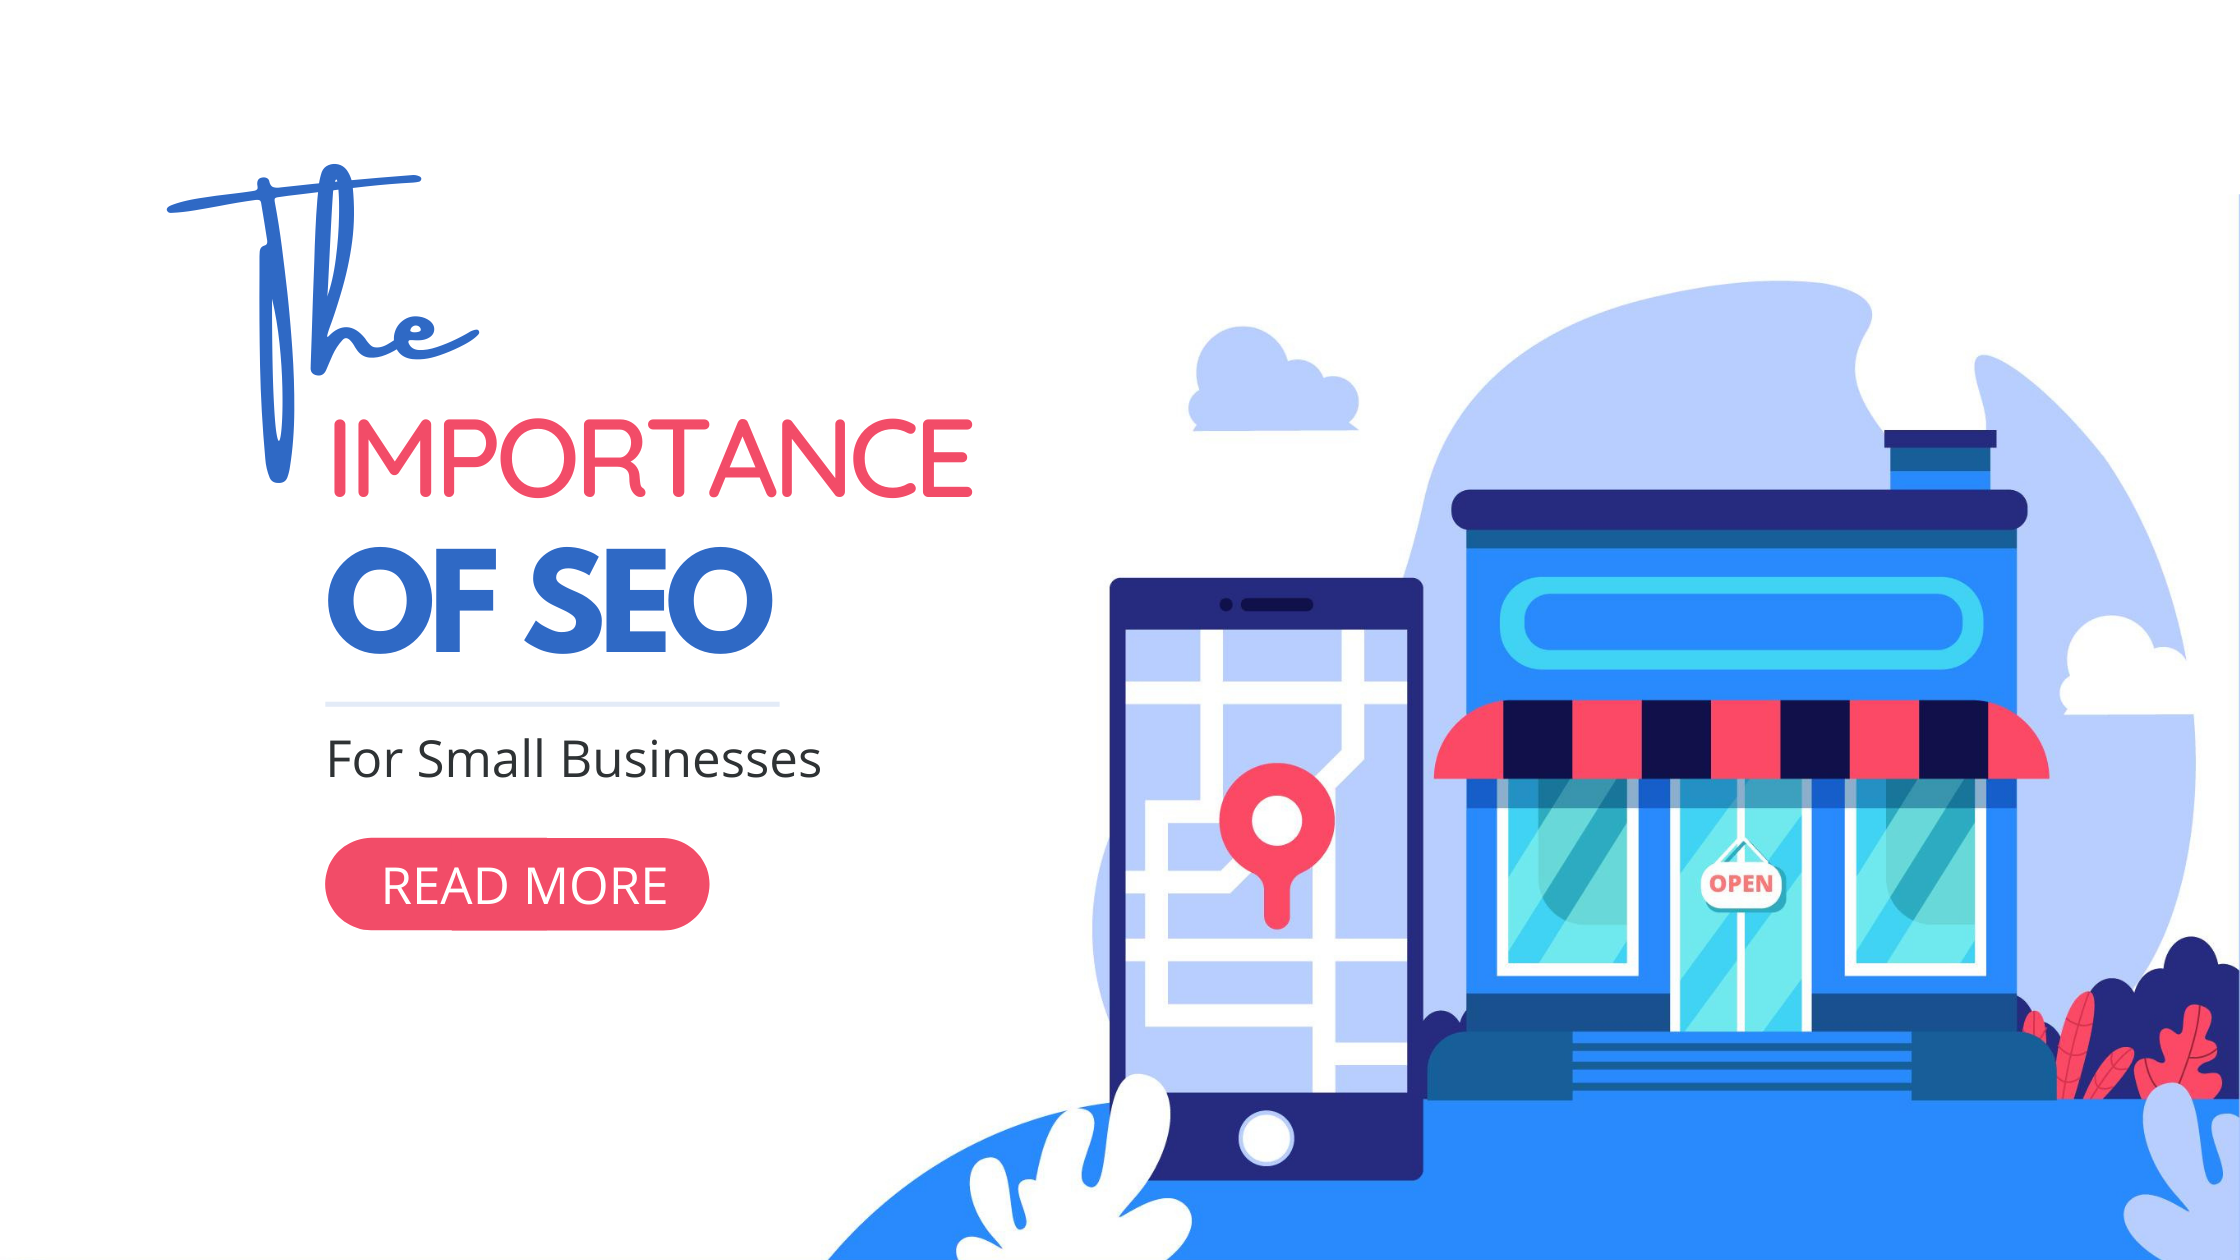 Importance of SEO For Small Businesses